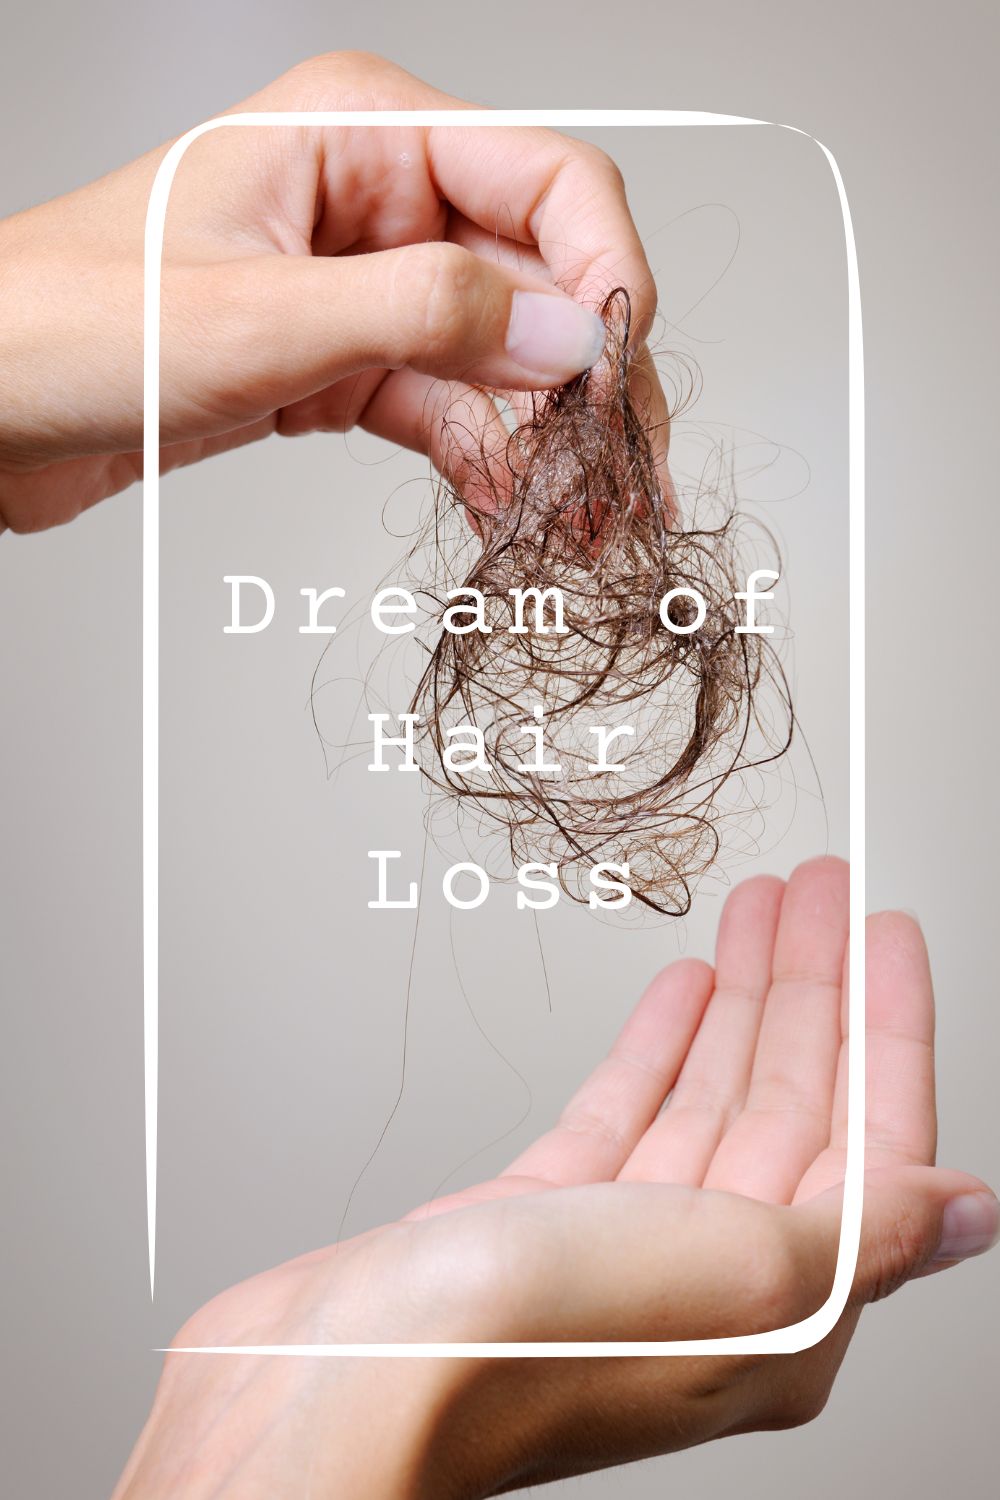 12 Dream of Hair Loss Meanings4